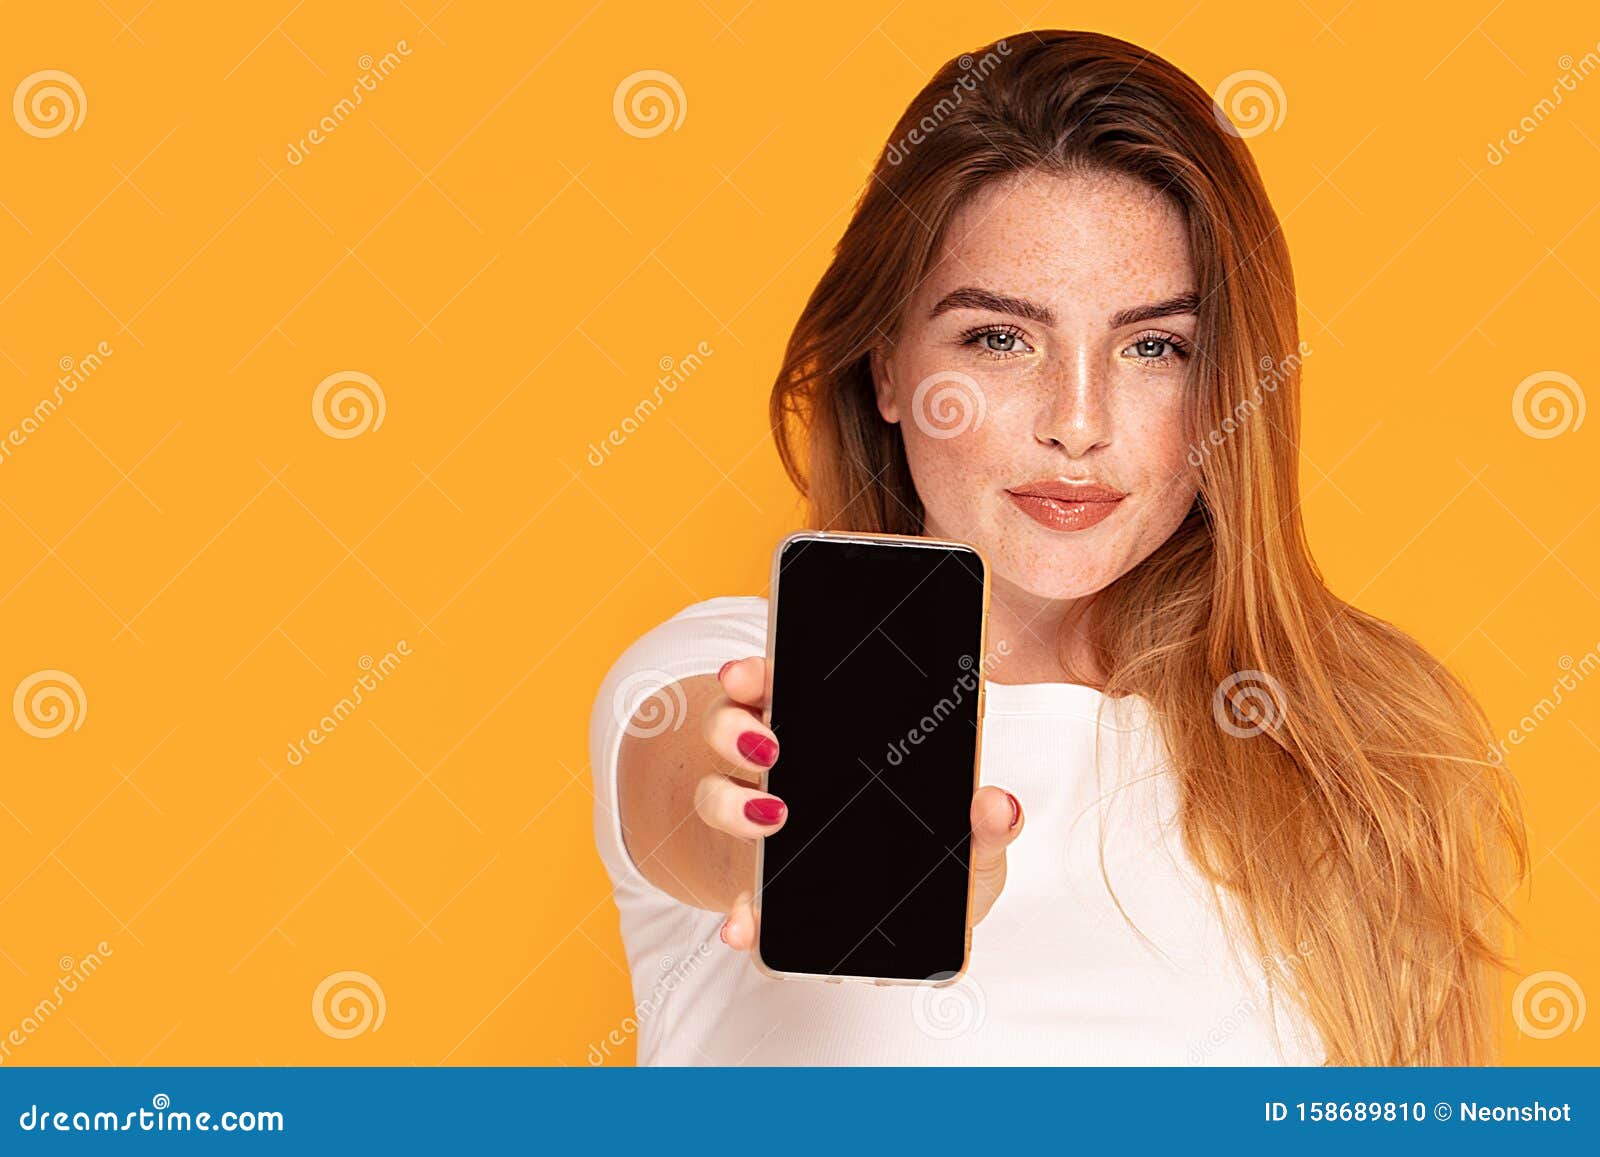 smiling girl showing mobile phone with empty screen